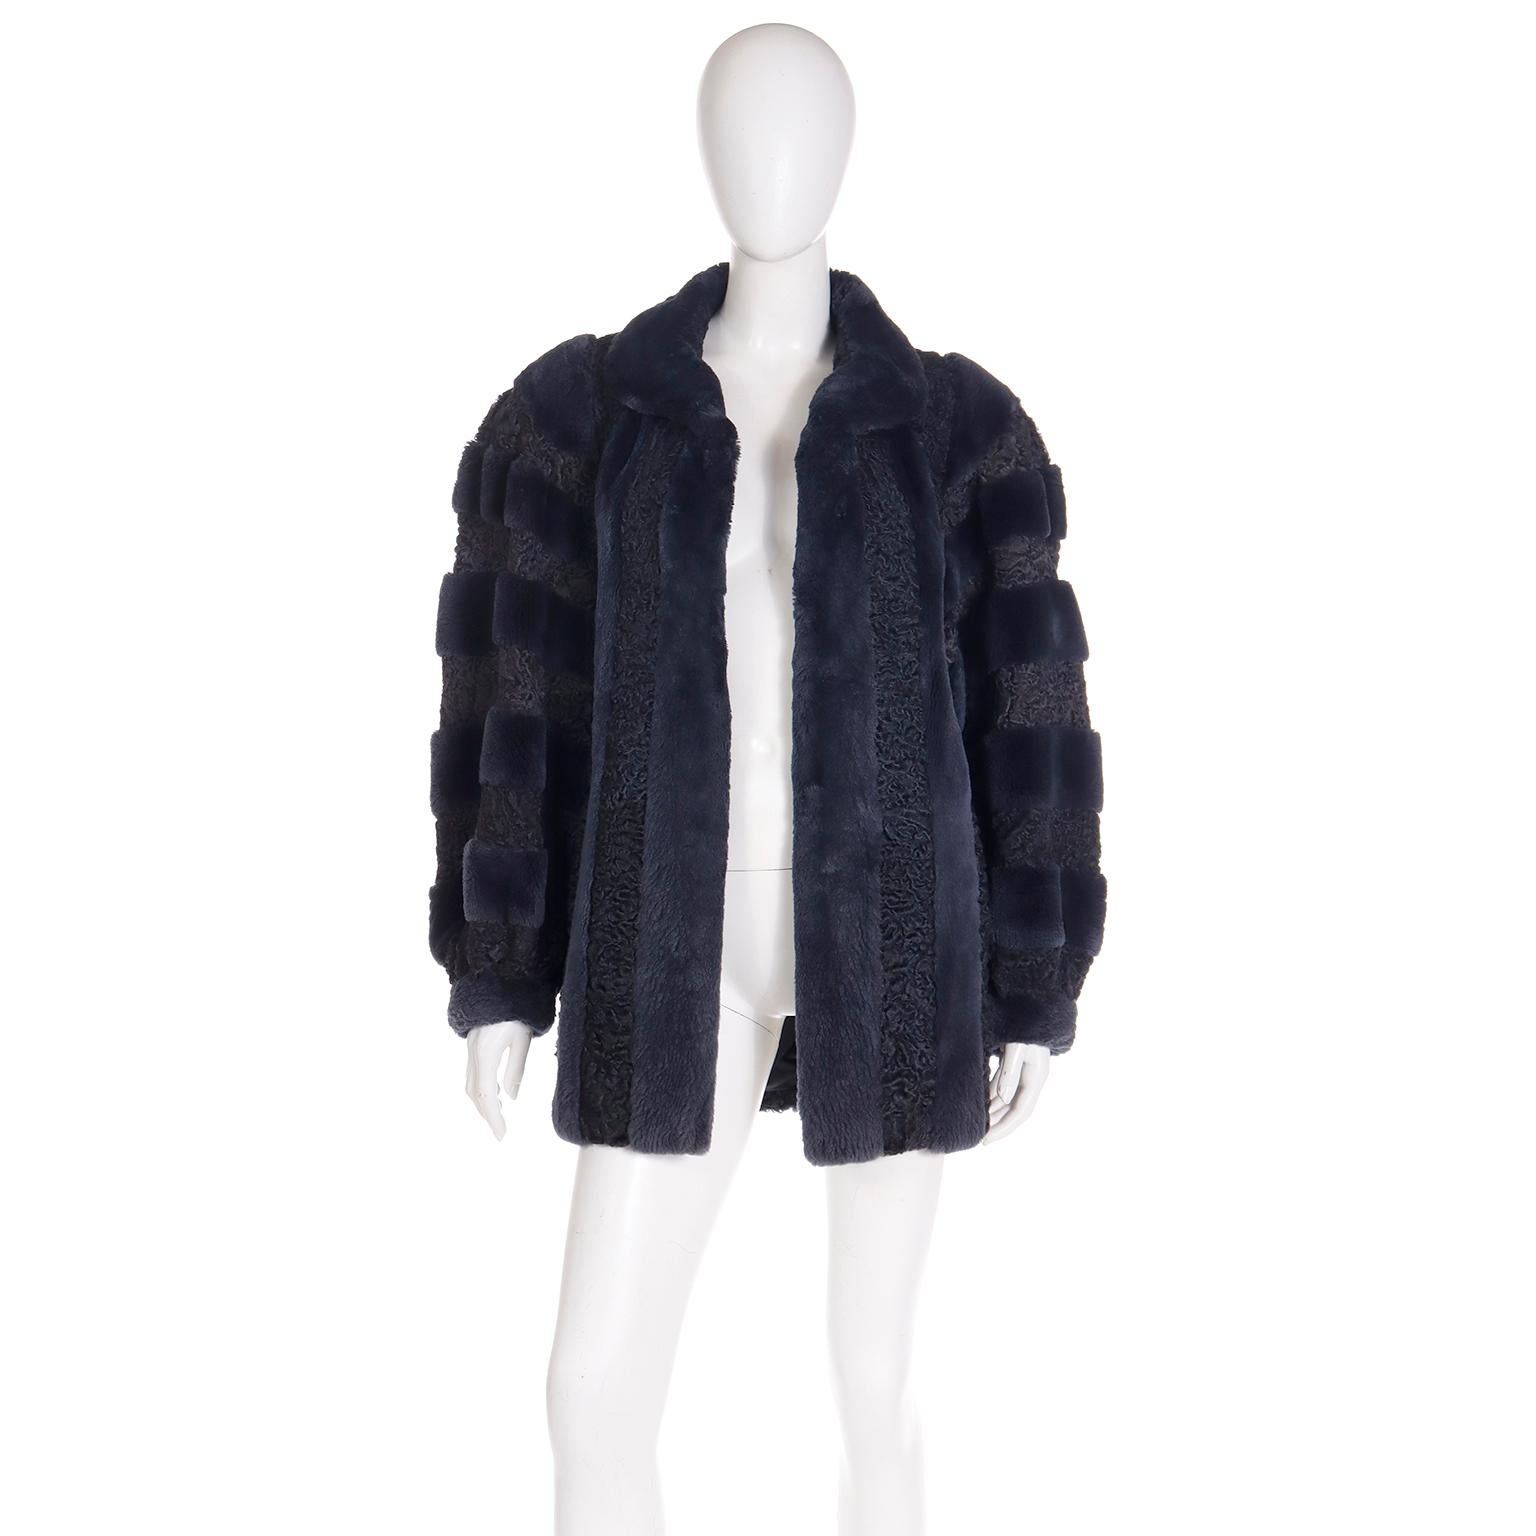 This is a very unique vintage 1980's Christian Dior jacket with alternating rows of Blue dyed sheared fur and black Persian lambswool. We love the way this coat is constructed and the beautiful Dior silk monogrammed lining is so luxurious and soft.